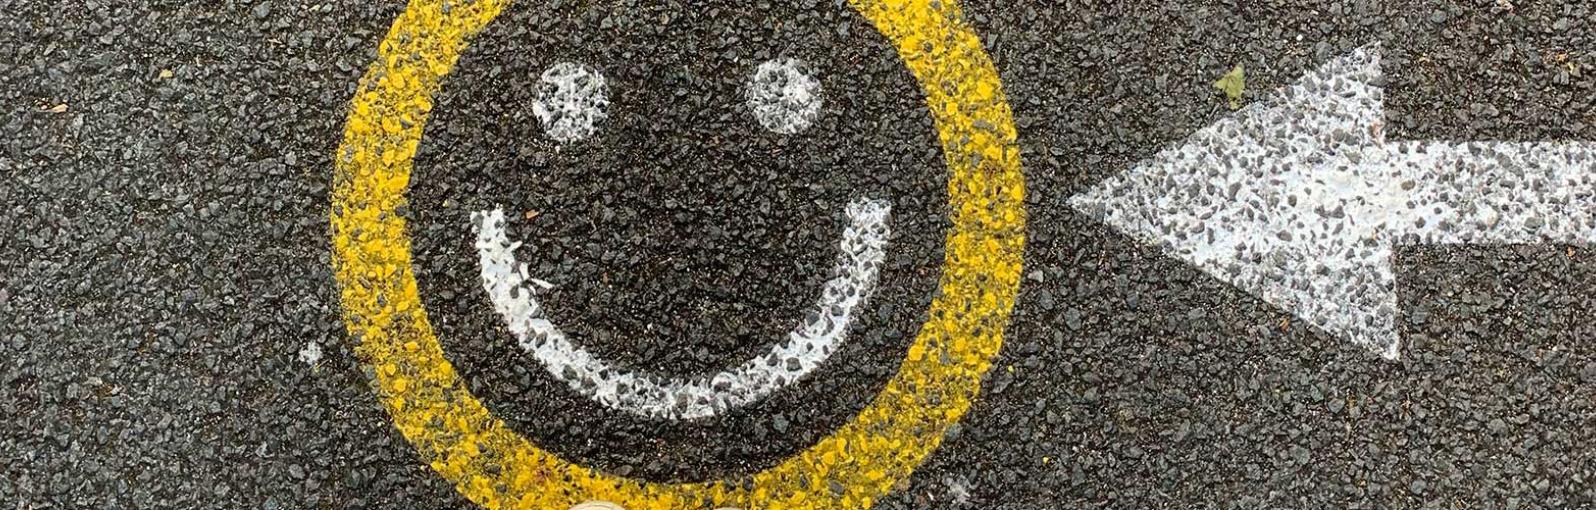 A smiley face painted on tarmac